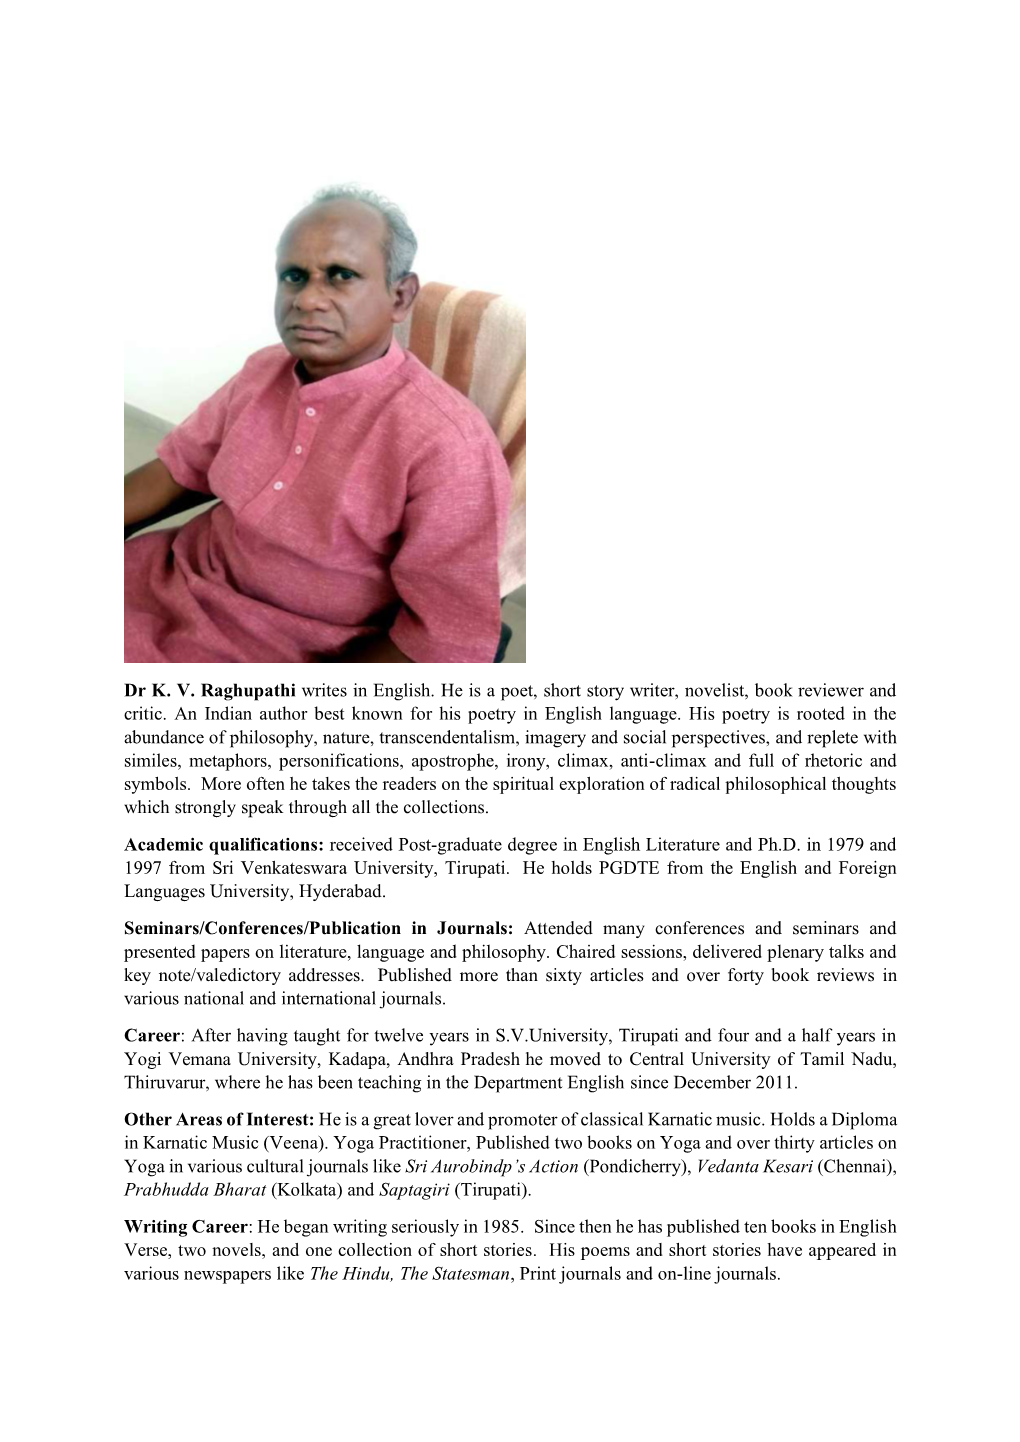 Dr K. V. Raghupathi Writes in English. He Is a Poet, Short Story Writer, Novelist, Book Reviewer and Critic